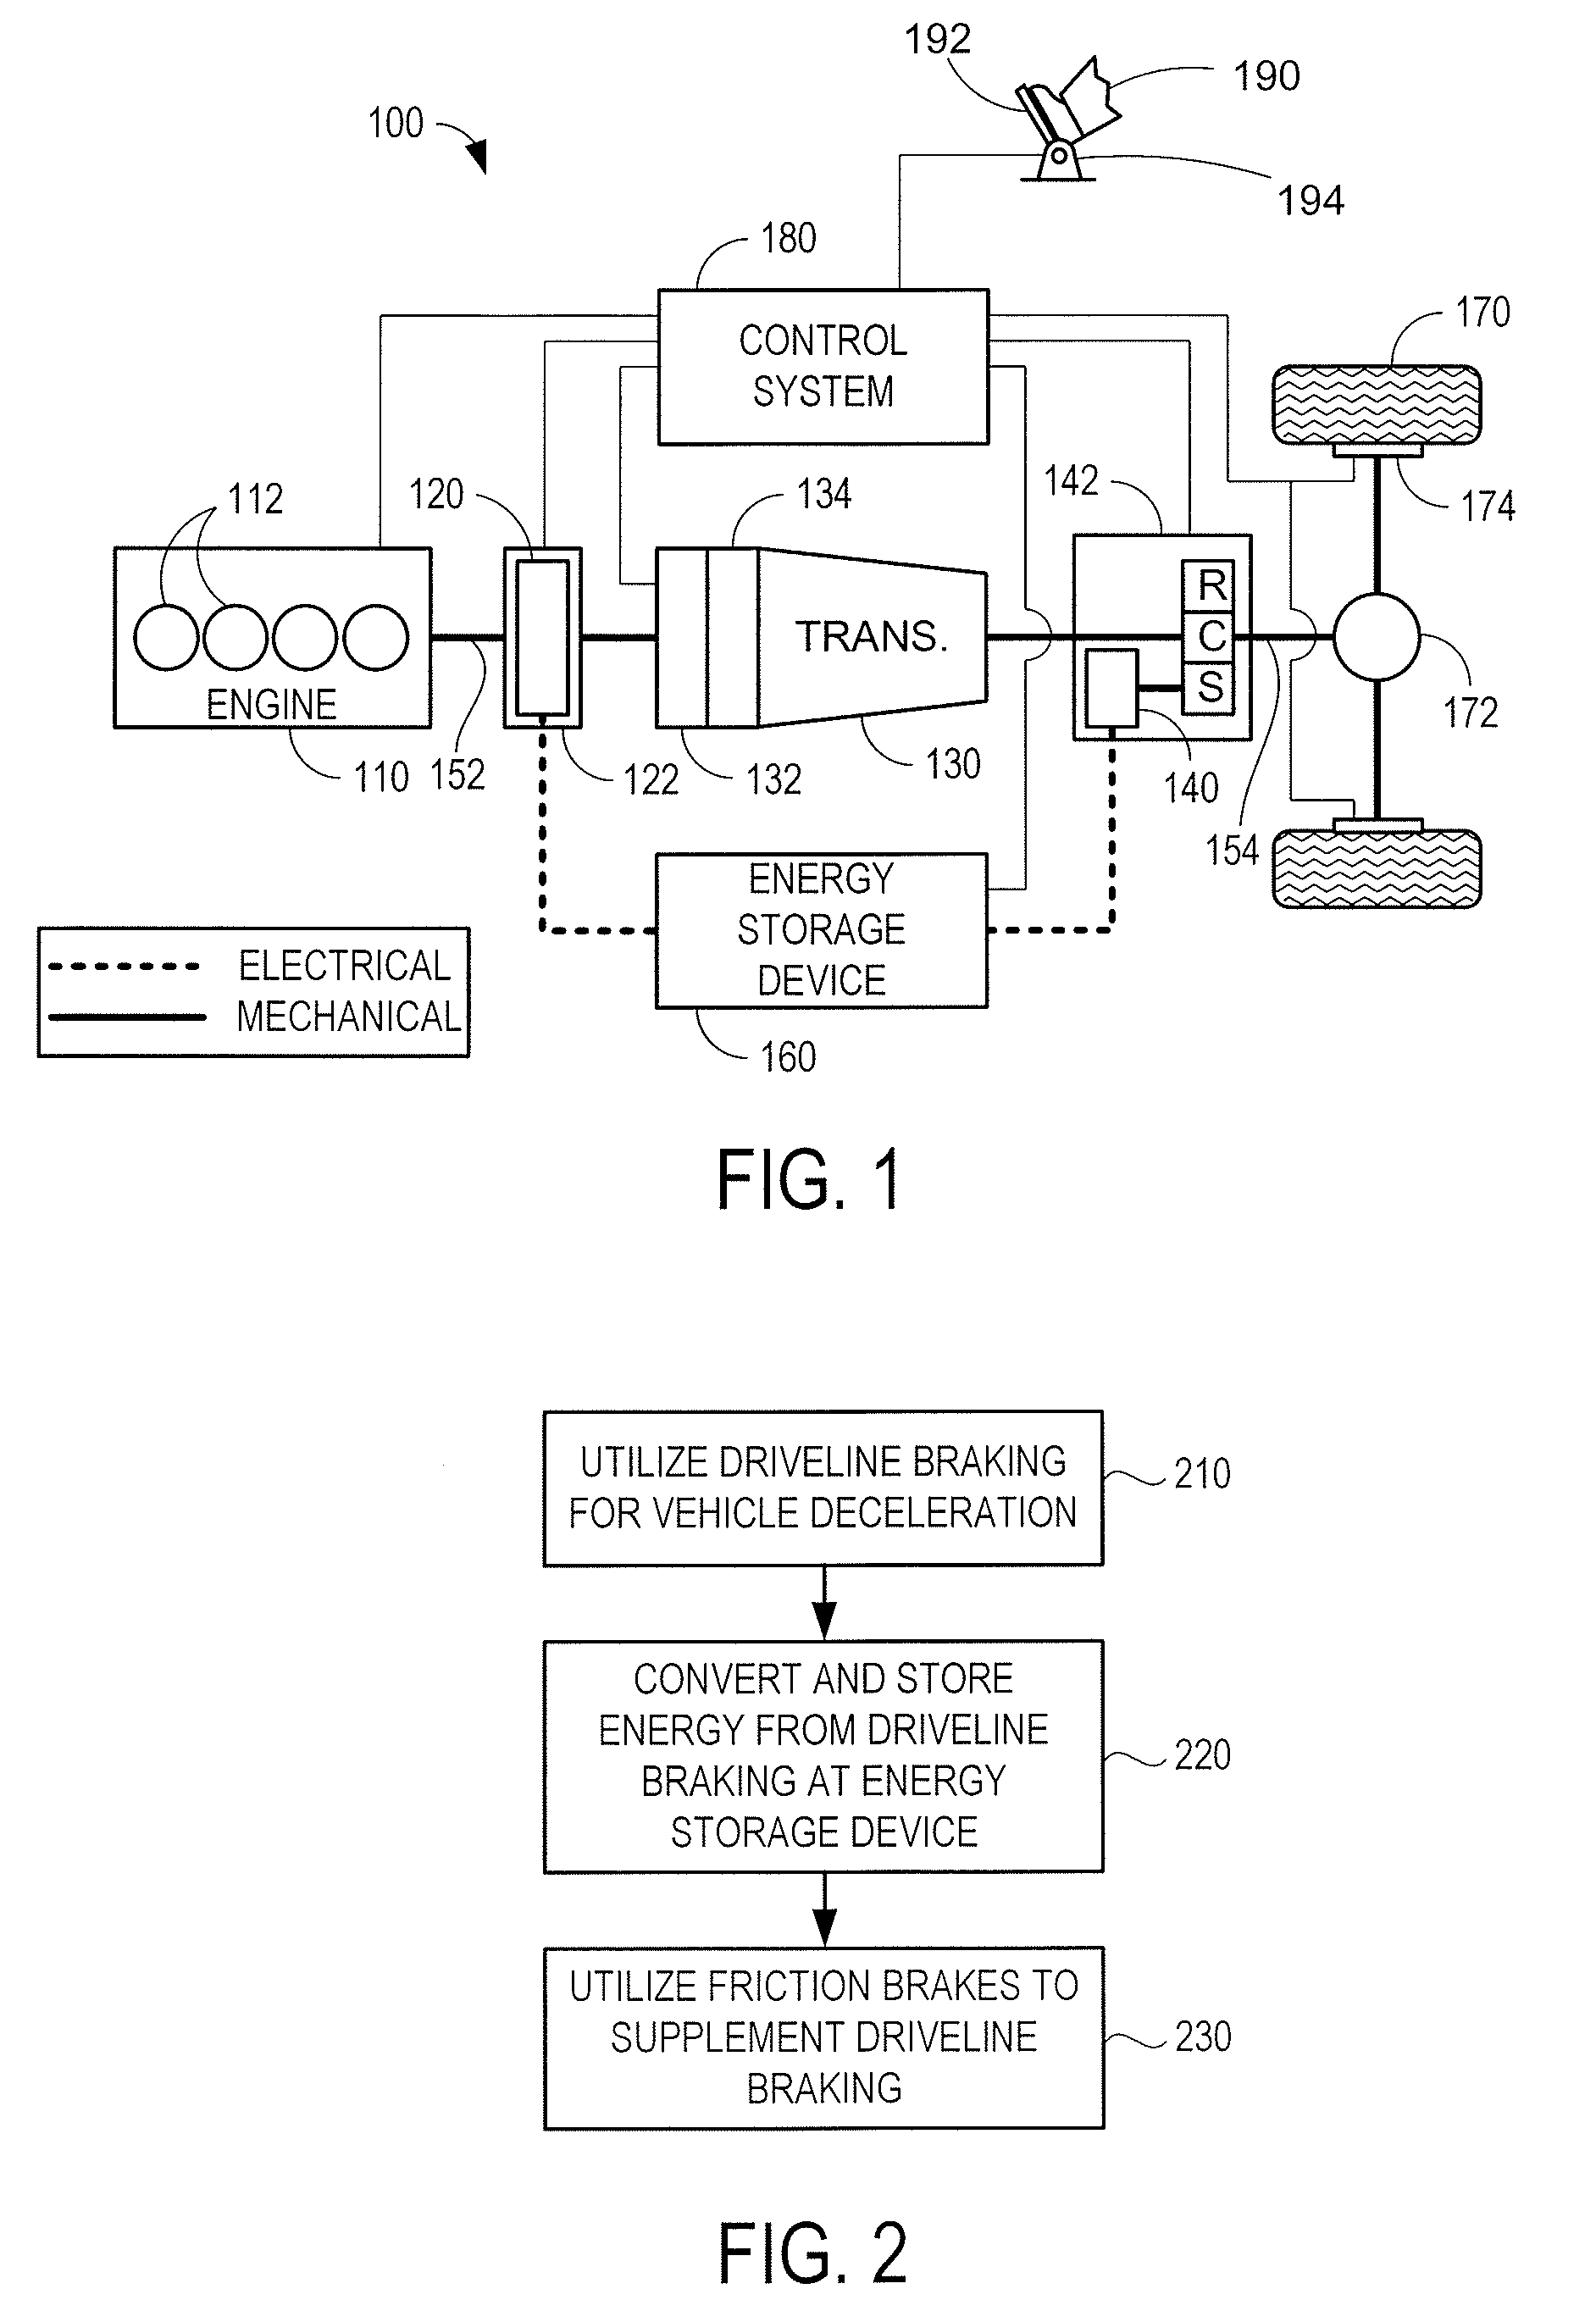 Negative driveline torque control incorporating transmission state selection for a hybrid vehicle